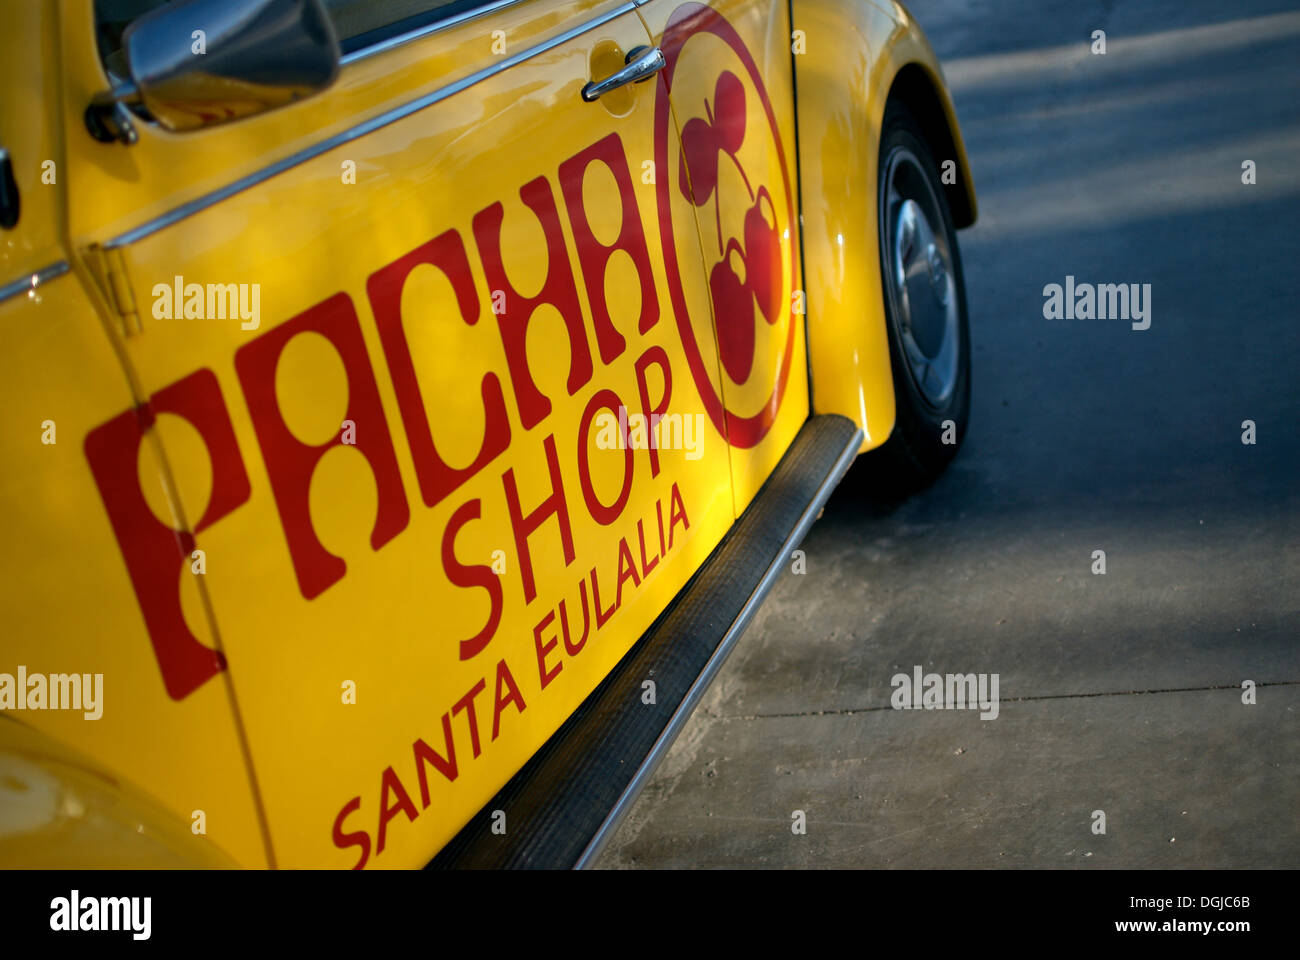 Pacha shop advertising in a Volkswagen Beetle yellow car Stock Photo